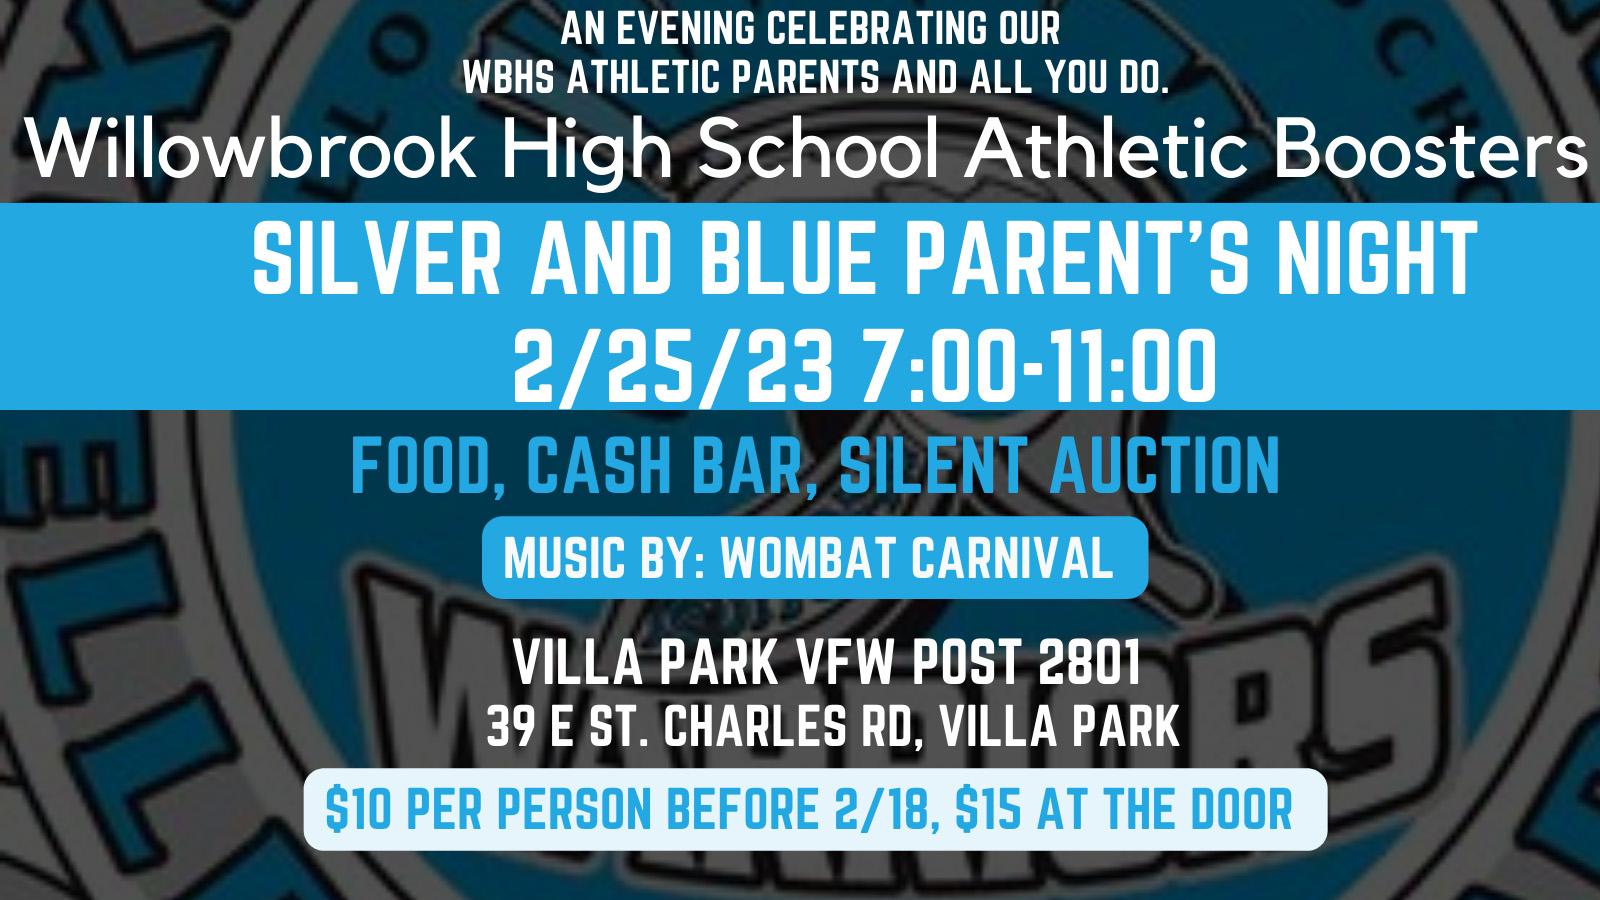 Willowbrook Athletic Booster Club to host ‘Silver and Blue Parents Night’